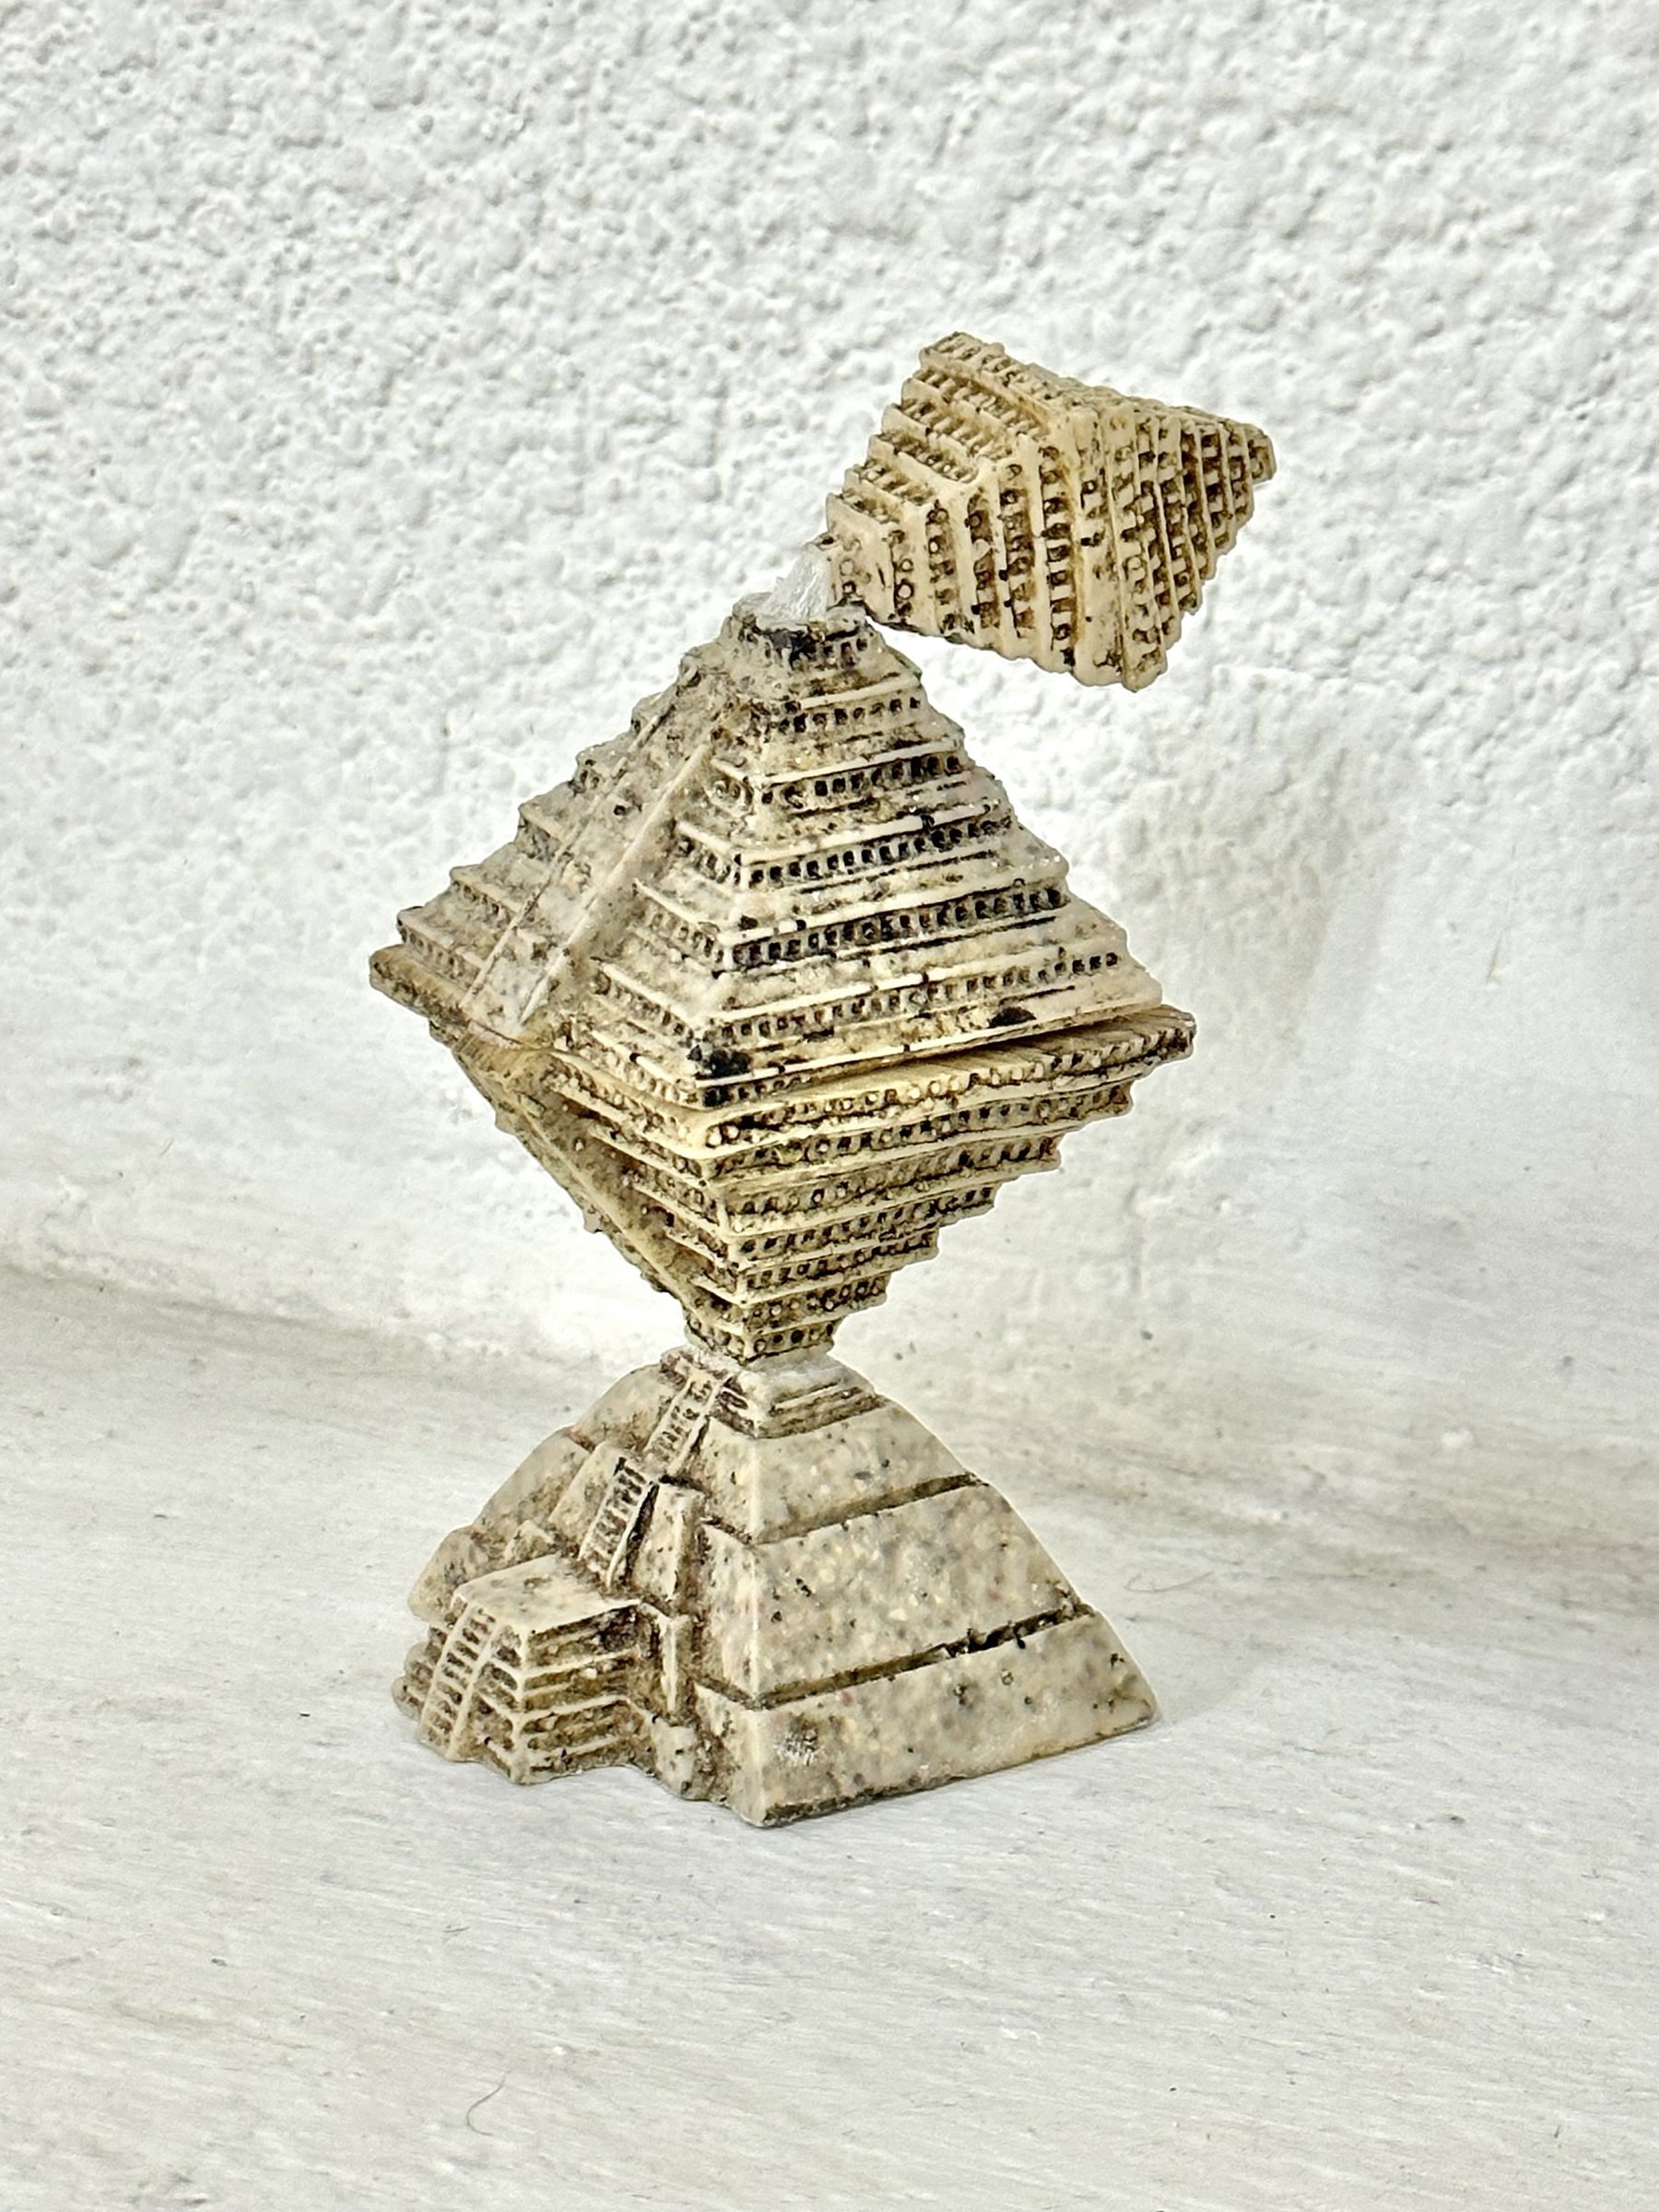    Pyramishap    cast resin assemblage  6” x 2.5” x 2.5”  2023  (available) 